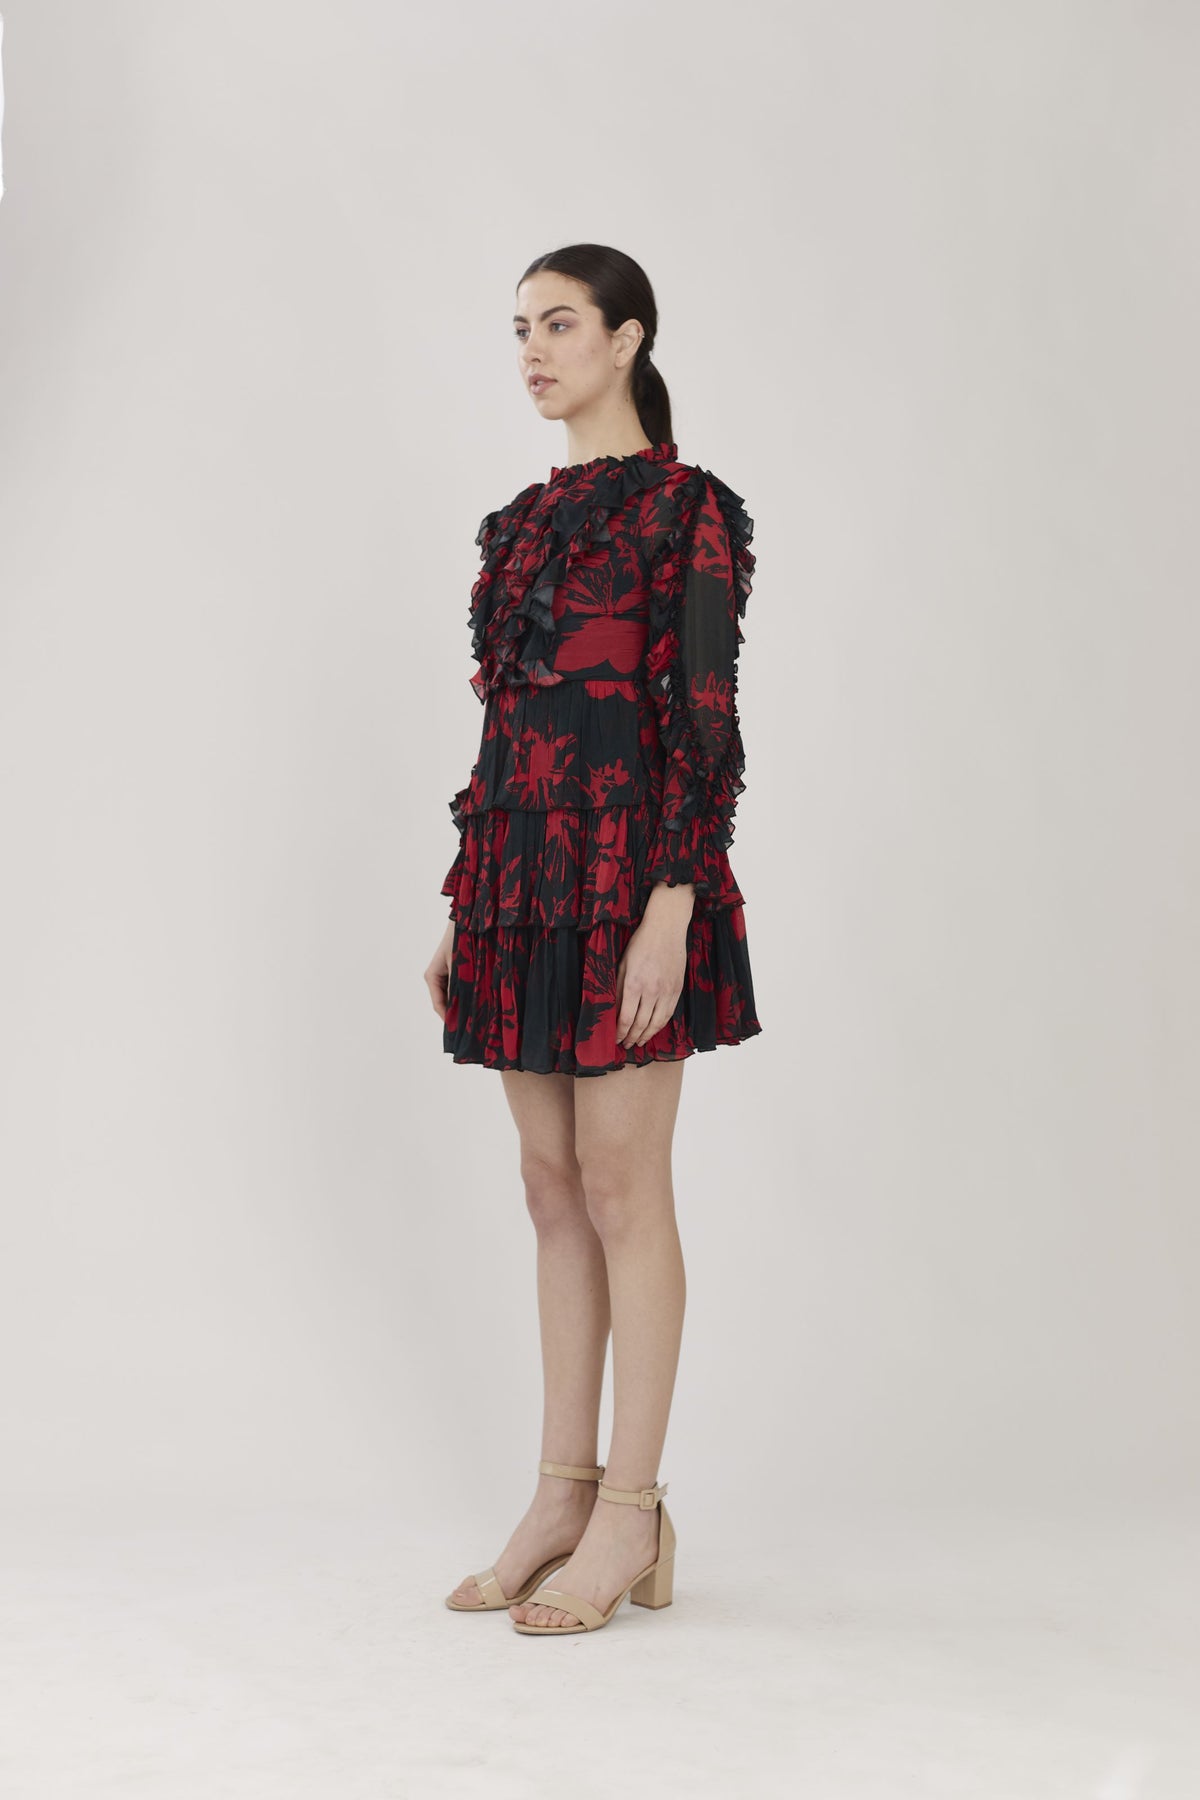 BLACK AND RED FLORAL FRILL SHORT DRESS